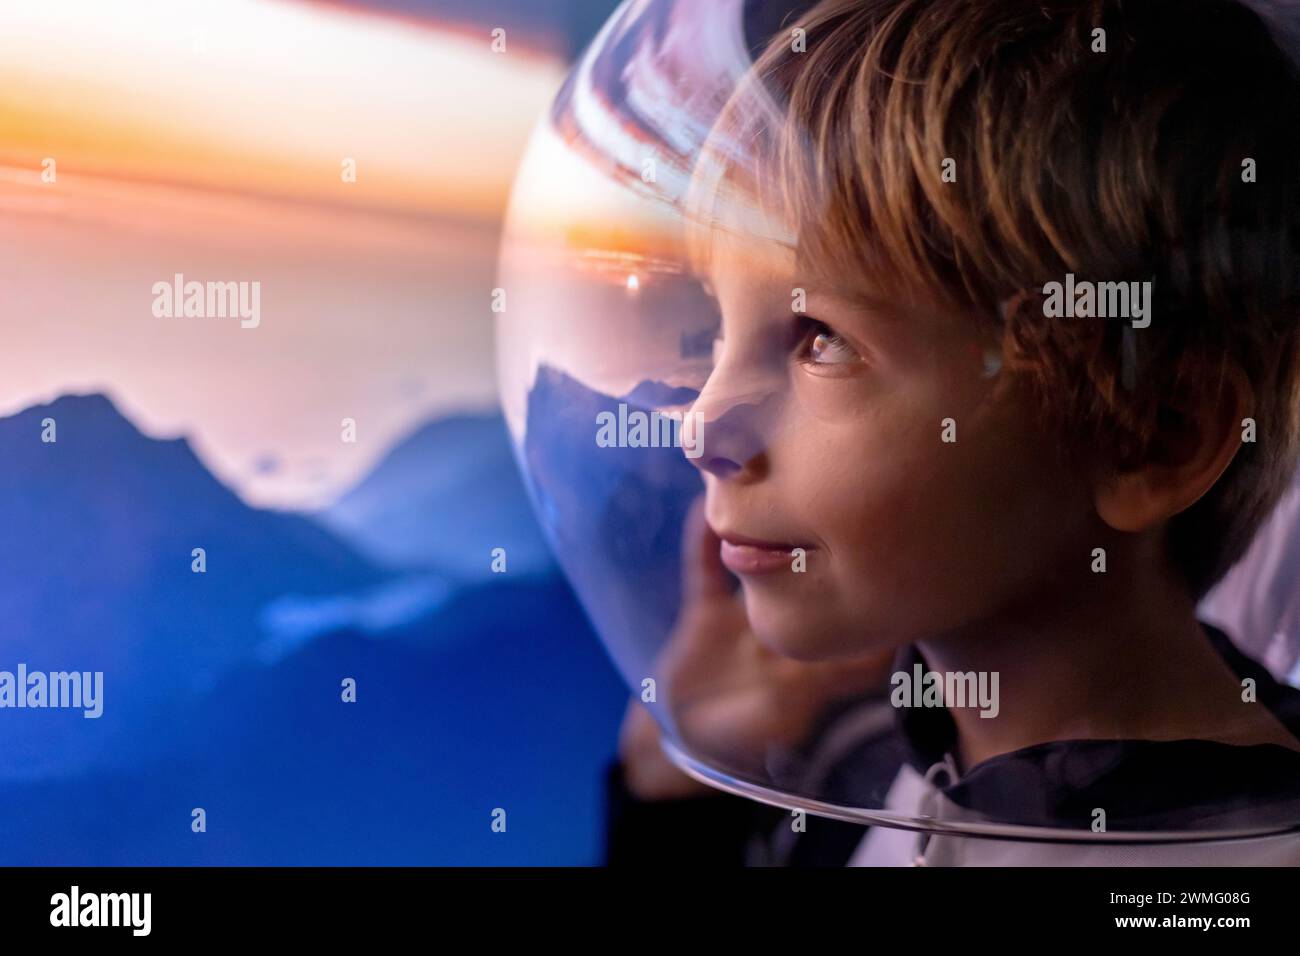 Cute child, boy, dreaming of becoming astronaut and flying into space. reflection of moon in his helmet Stock Photo